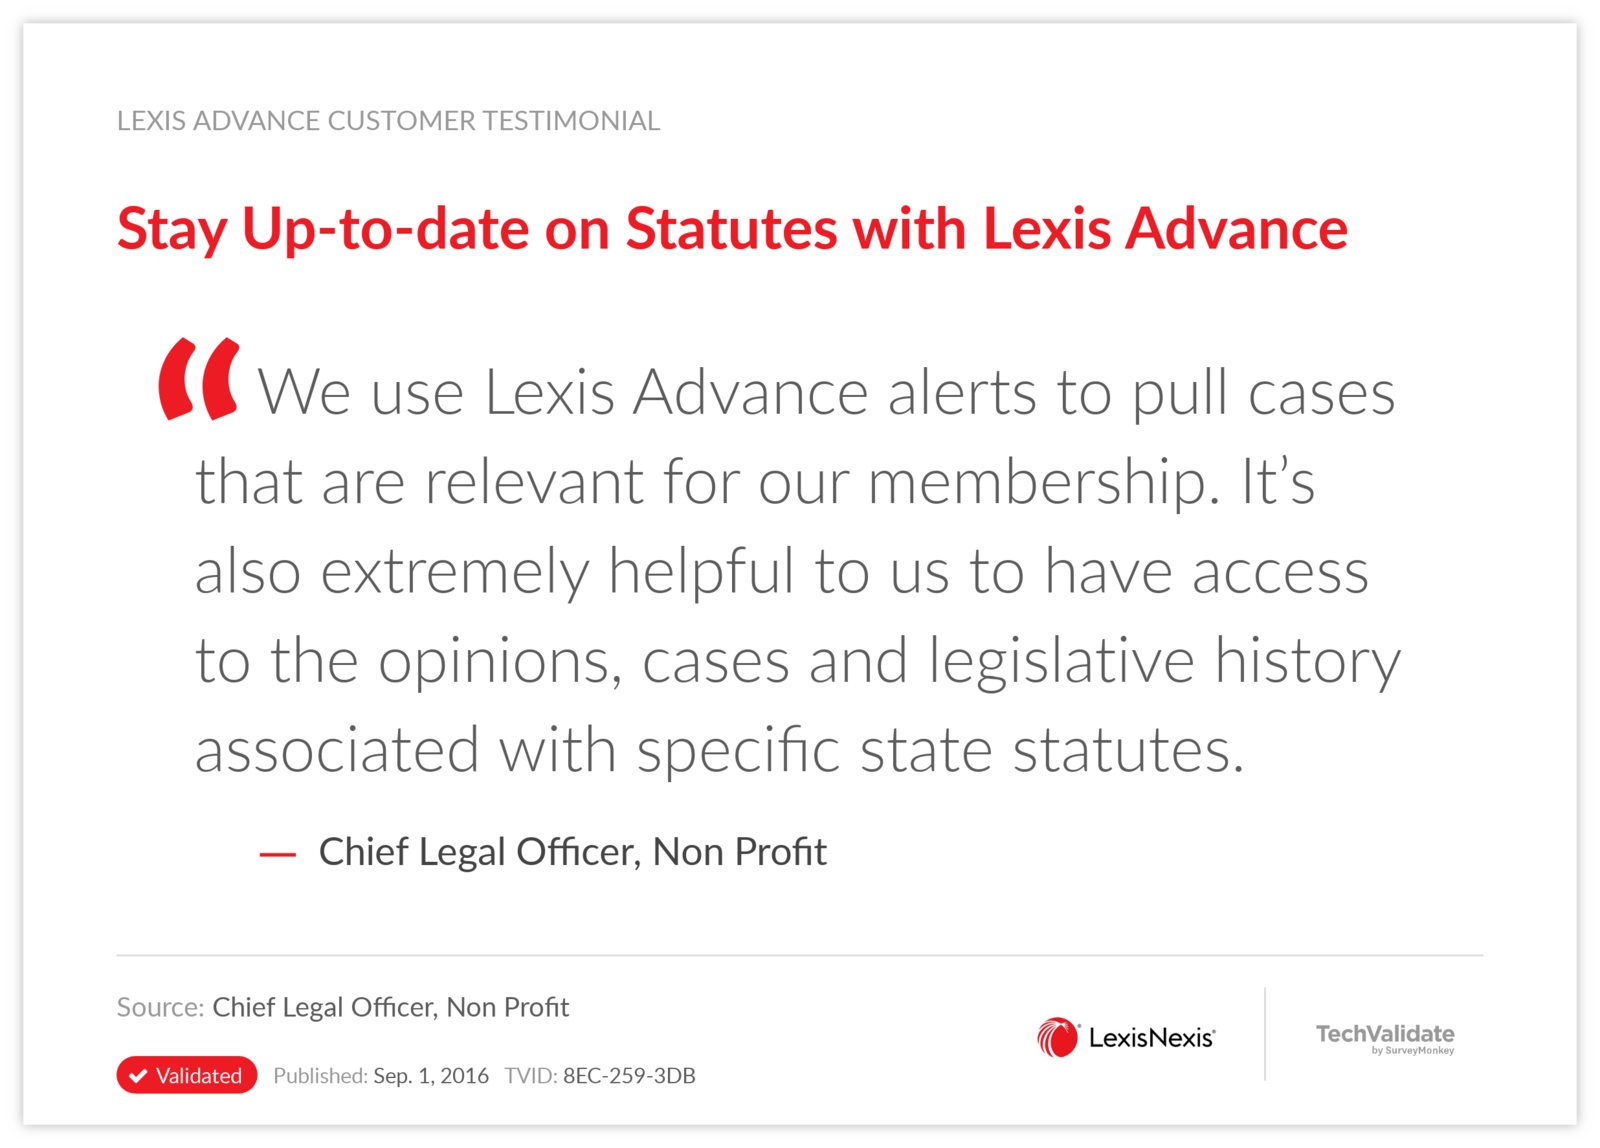 Stay Up-to-date on Statutes with Lexis Advance